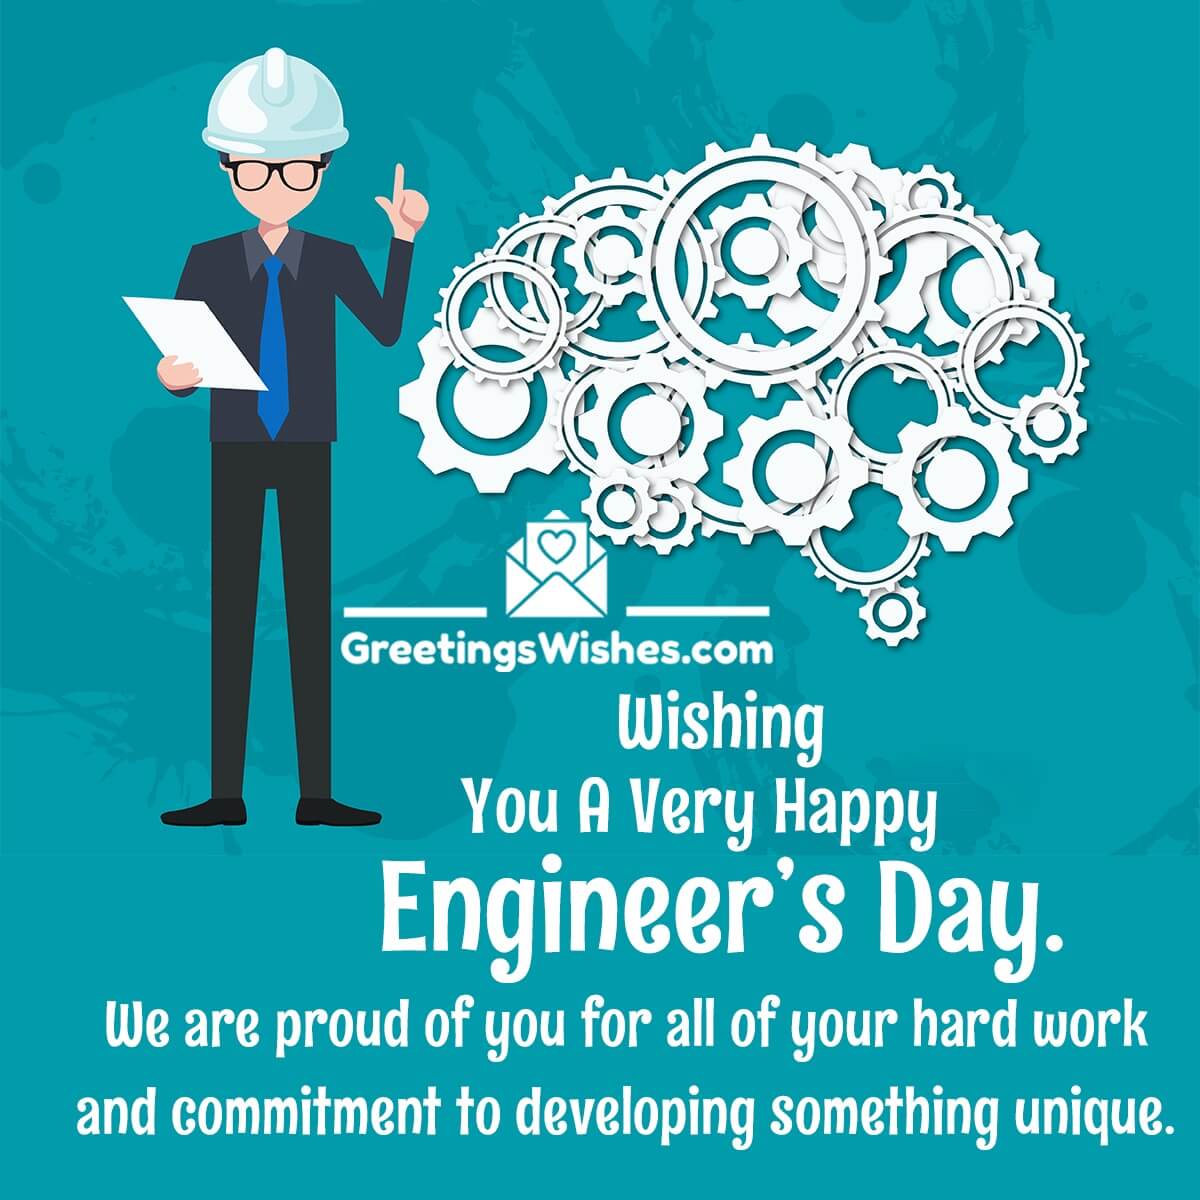 Wishing You A Very Happy Engineer’s Day